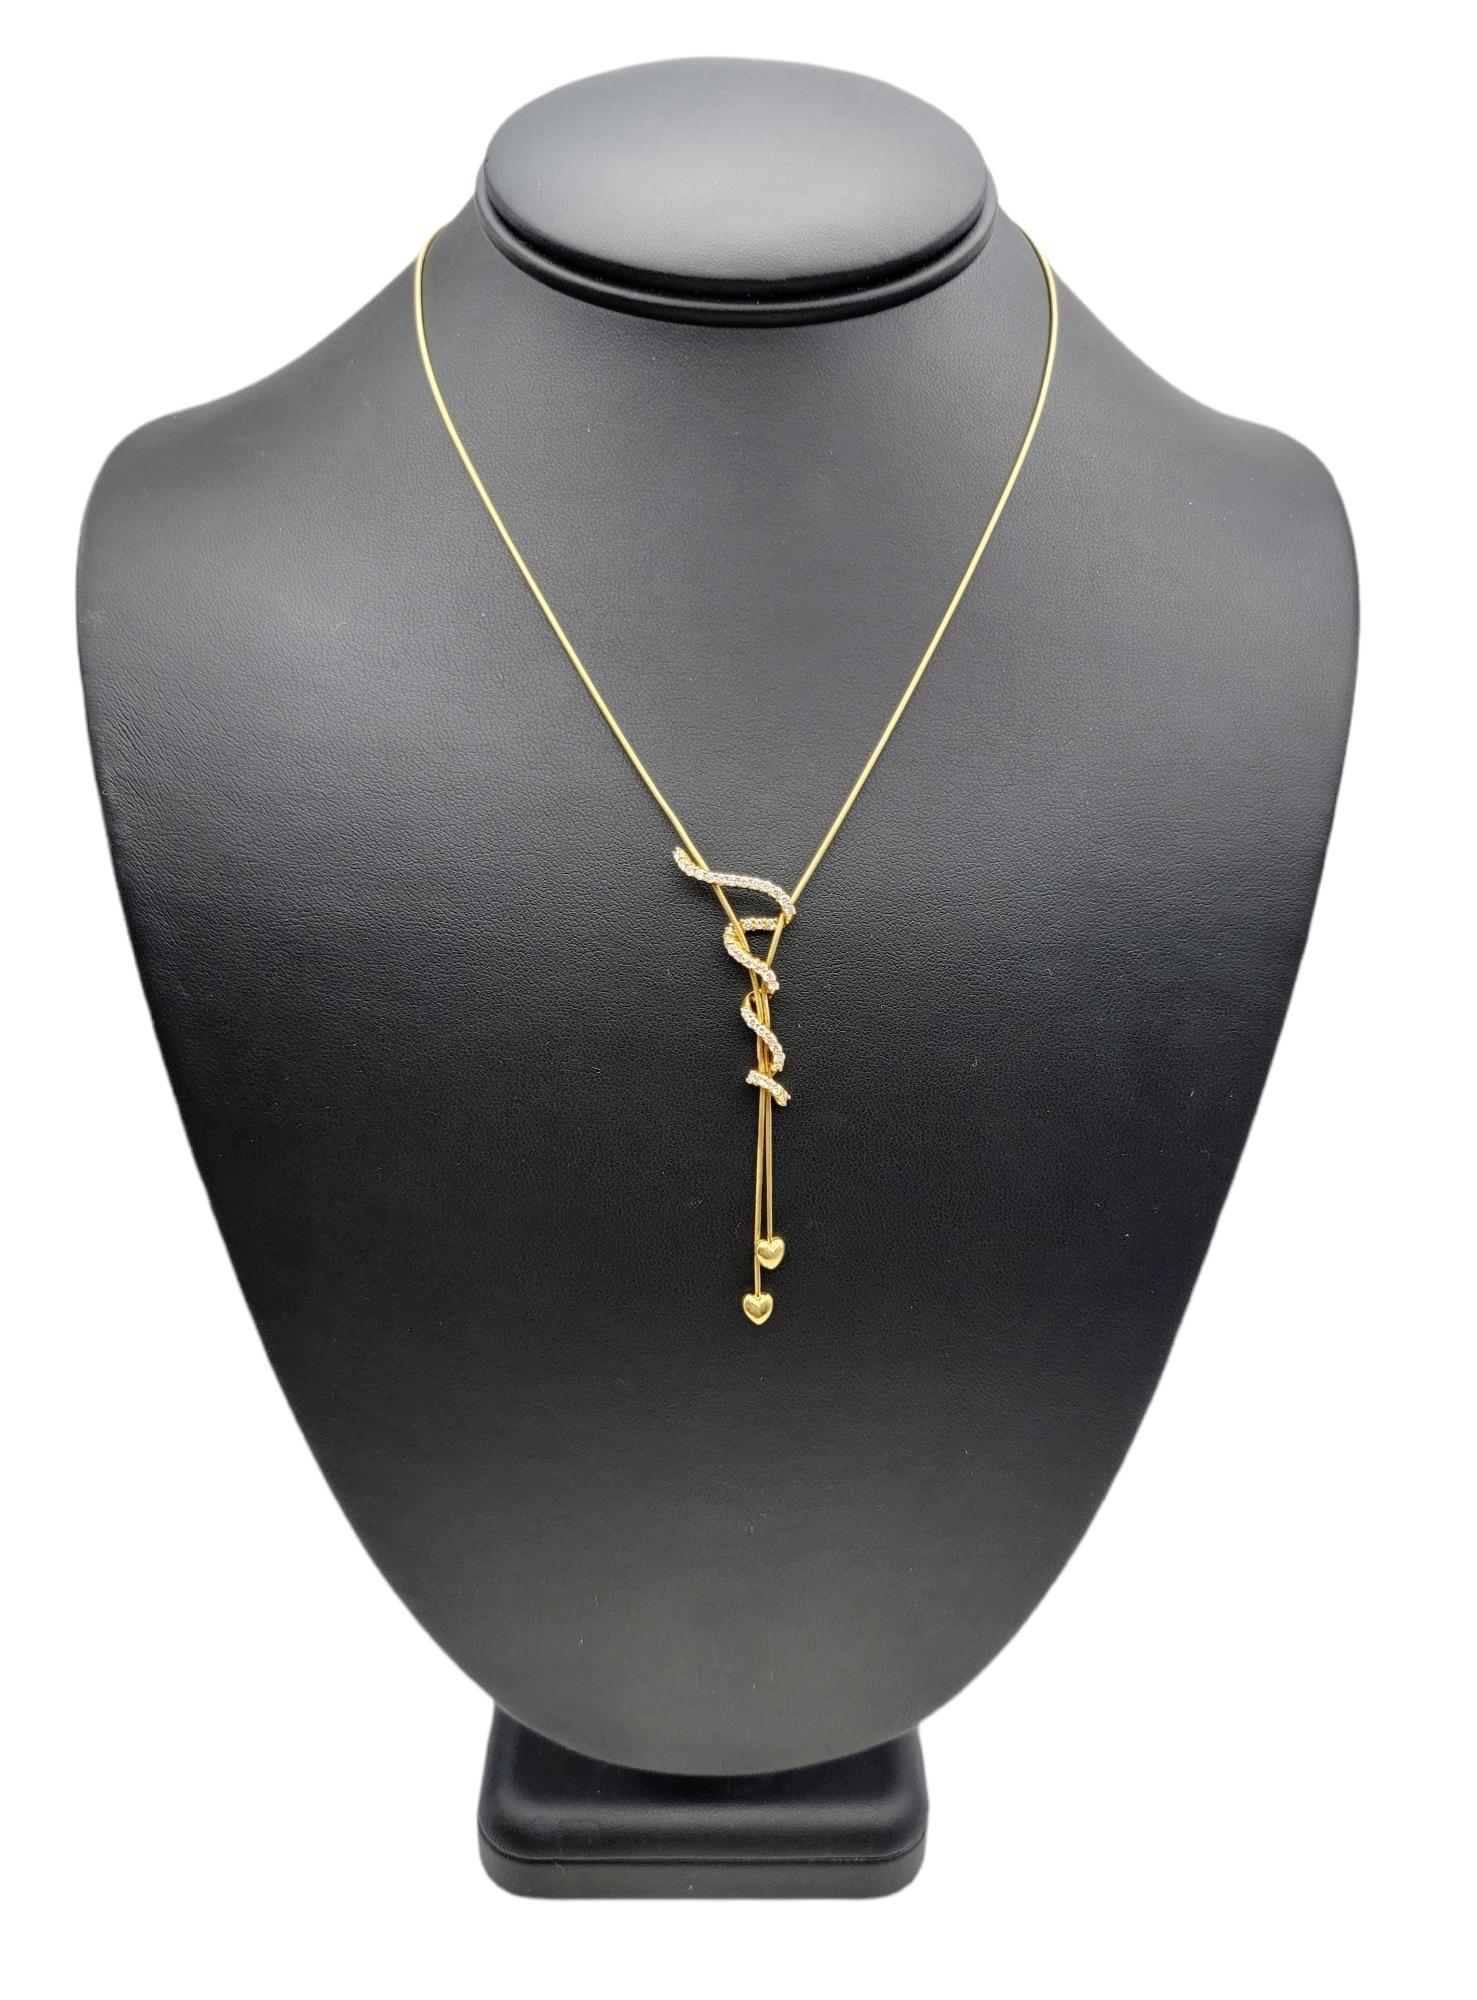 Jose Hess 18 Karat Yellow Gold Drop Necklace with Hearts and Diamond Squiggle For Sale 3